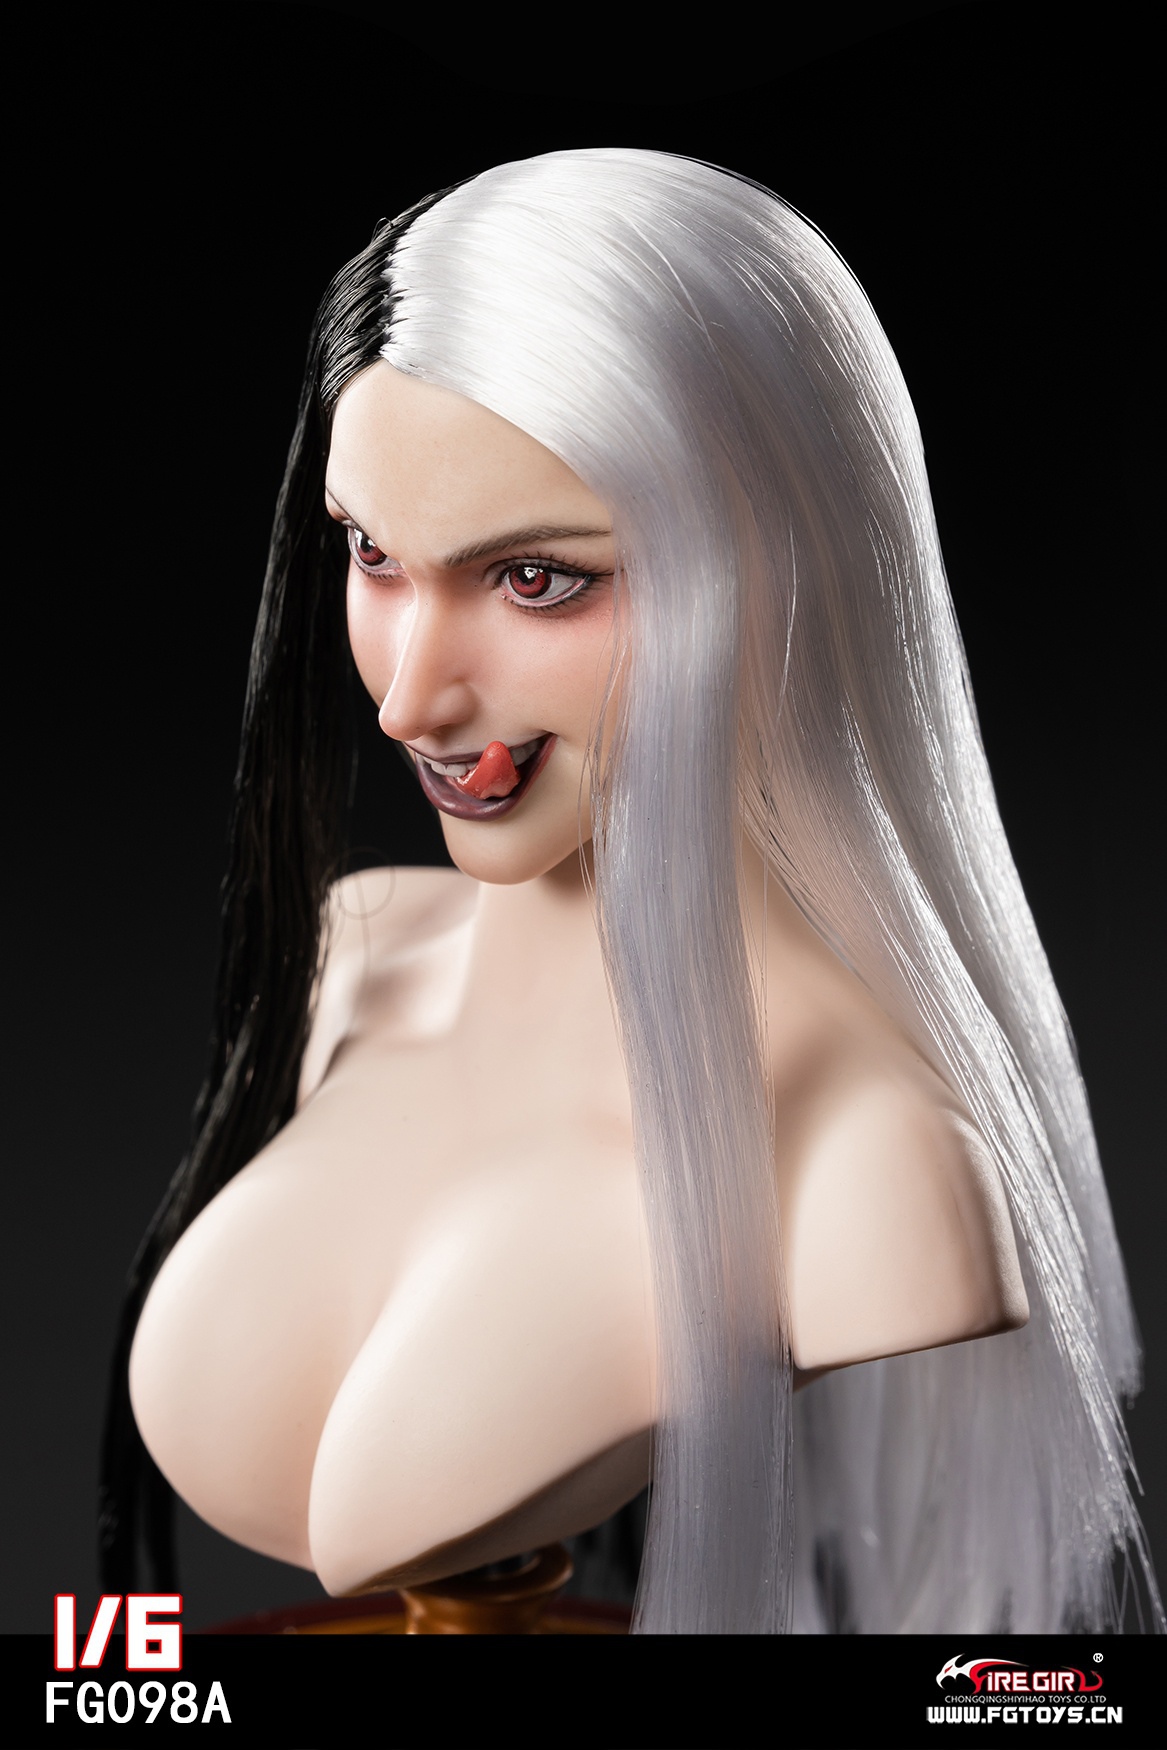 female - NEW PRODUCT: Fire Girl Toys: Witch Head Sculpture (FG098A/FG098B) 0318